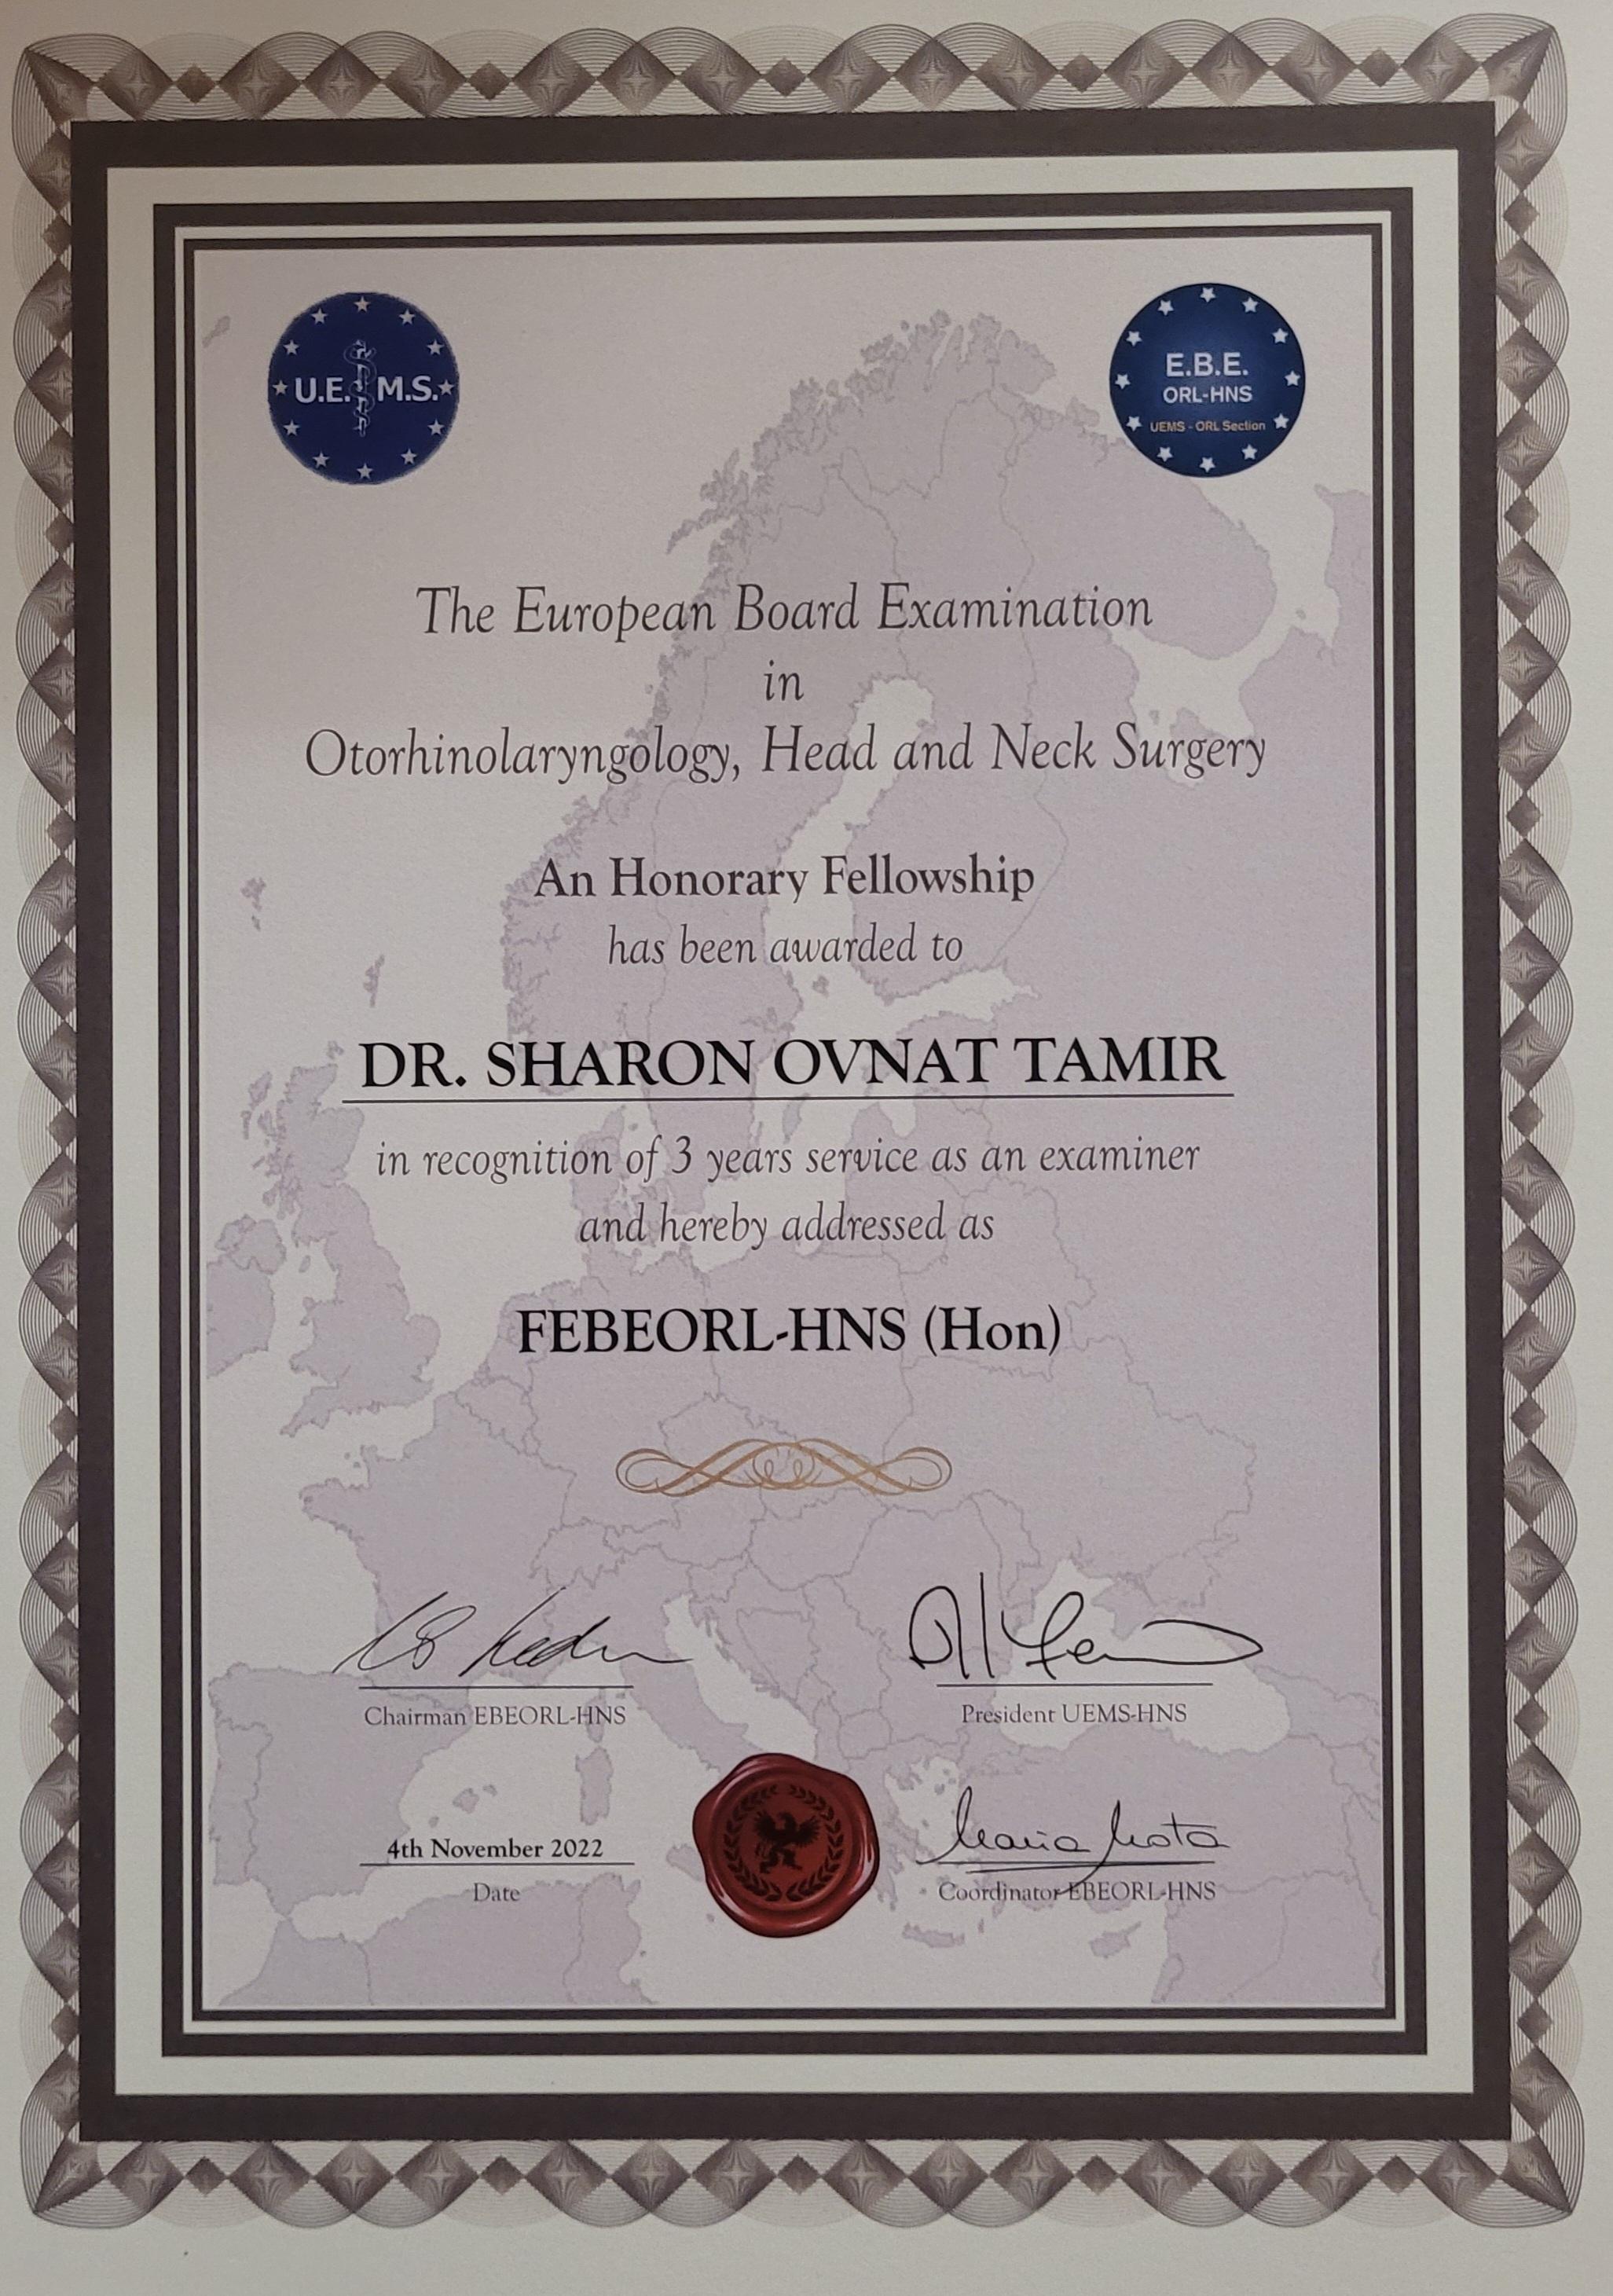 Awarded an Honorary Fellowship from the European Board of Examiners of Otolaryngology/Head and Neck Surgery 